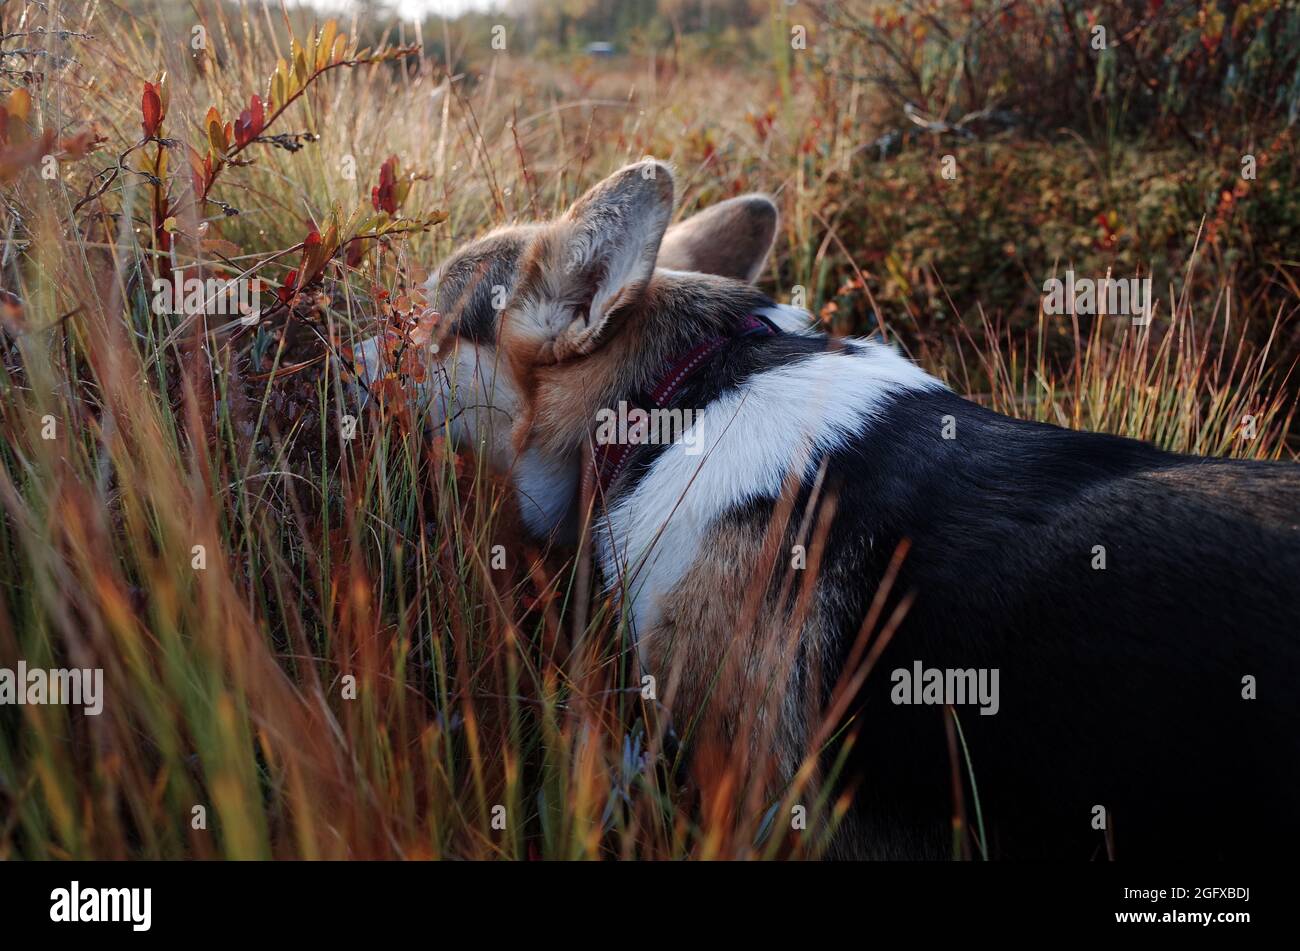 Welsh corgi pembroke dog in the cranberry field, searching something in the grass, autumn colors, sunbeams, sunlight, Stock Photo